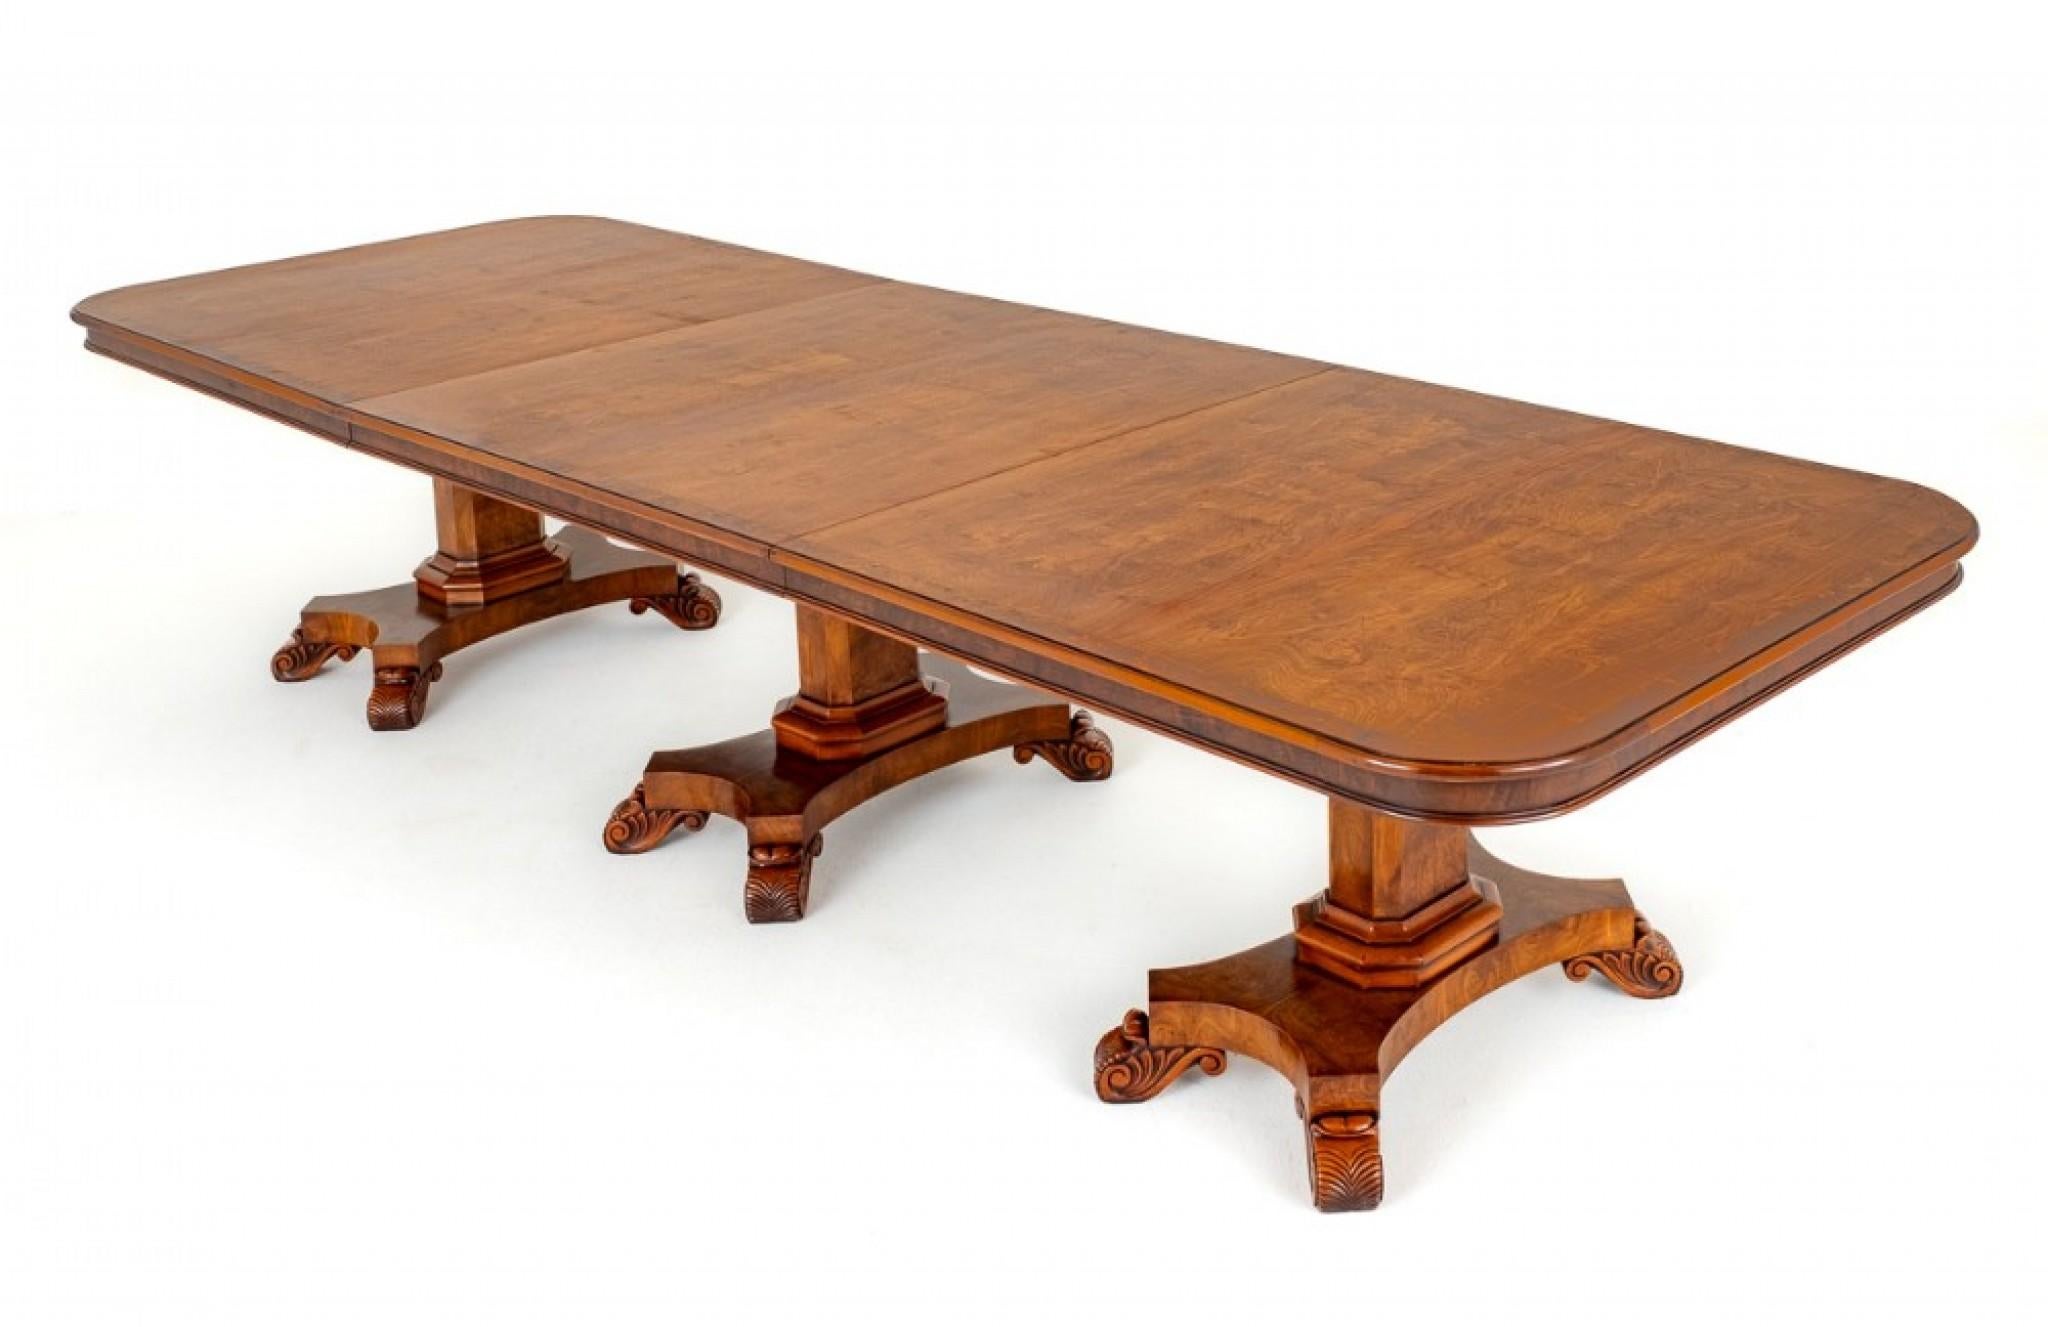 Regency Dining Table Walnut Extending 20 Seater George Bullock In Good Condition For Sale In Potters Bar, GB